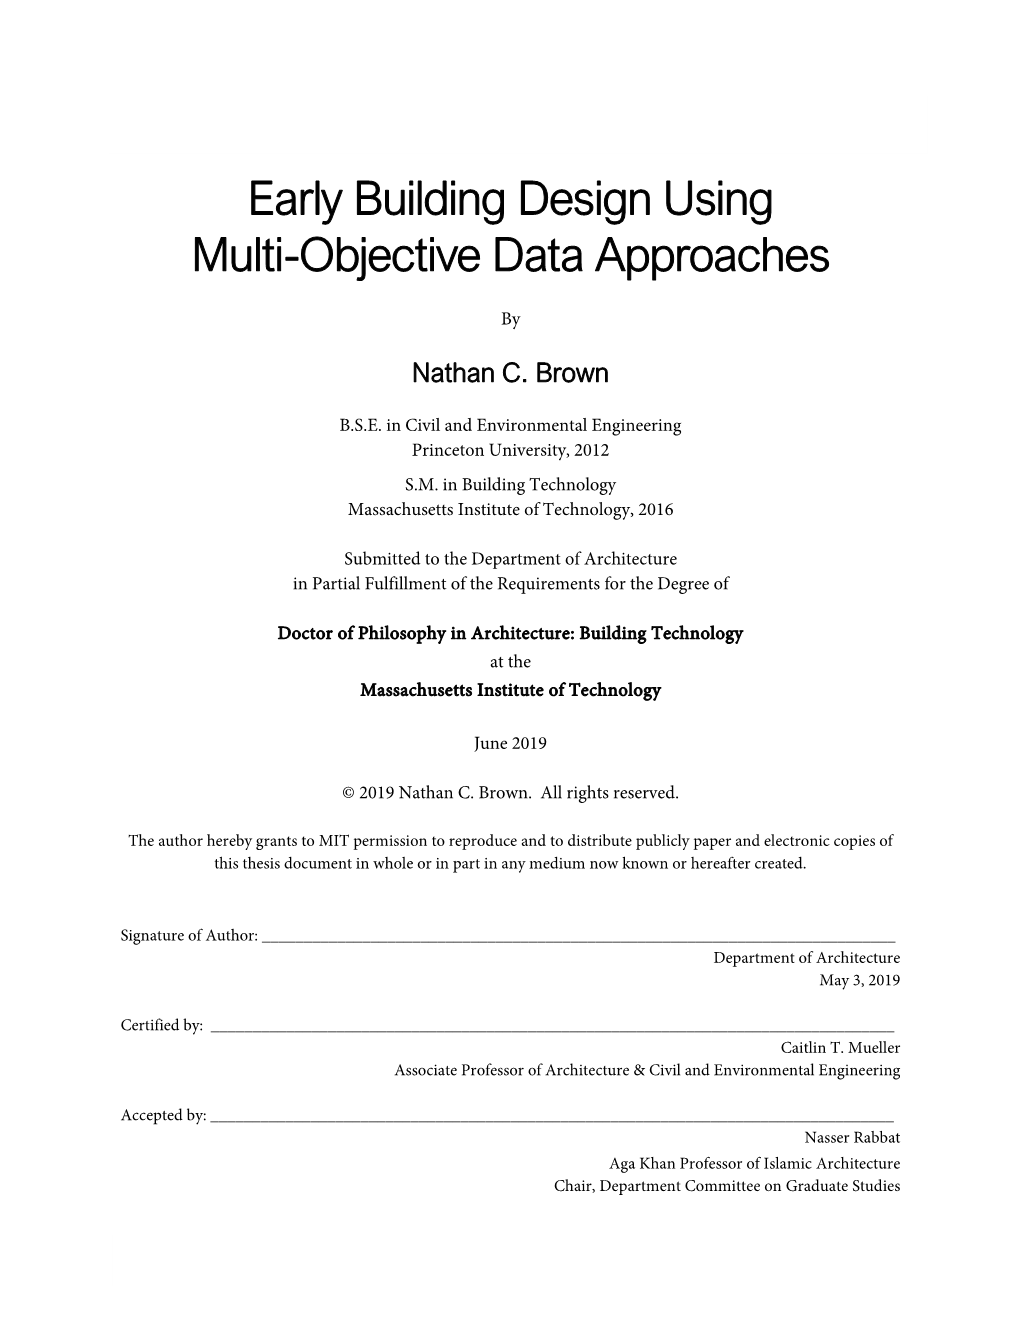 Early Building Design Using Multi-Objective Data Approaches